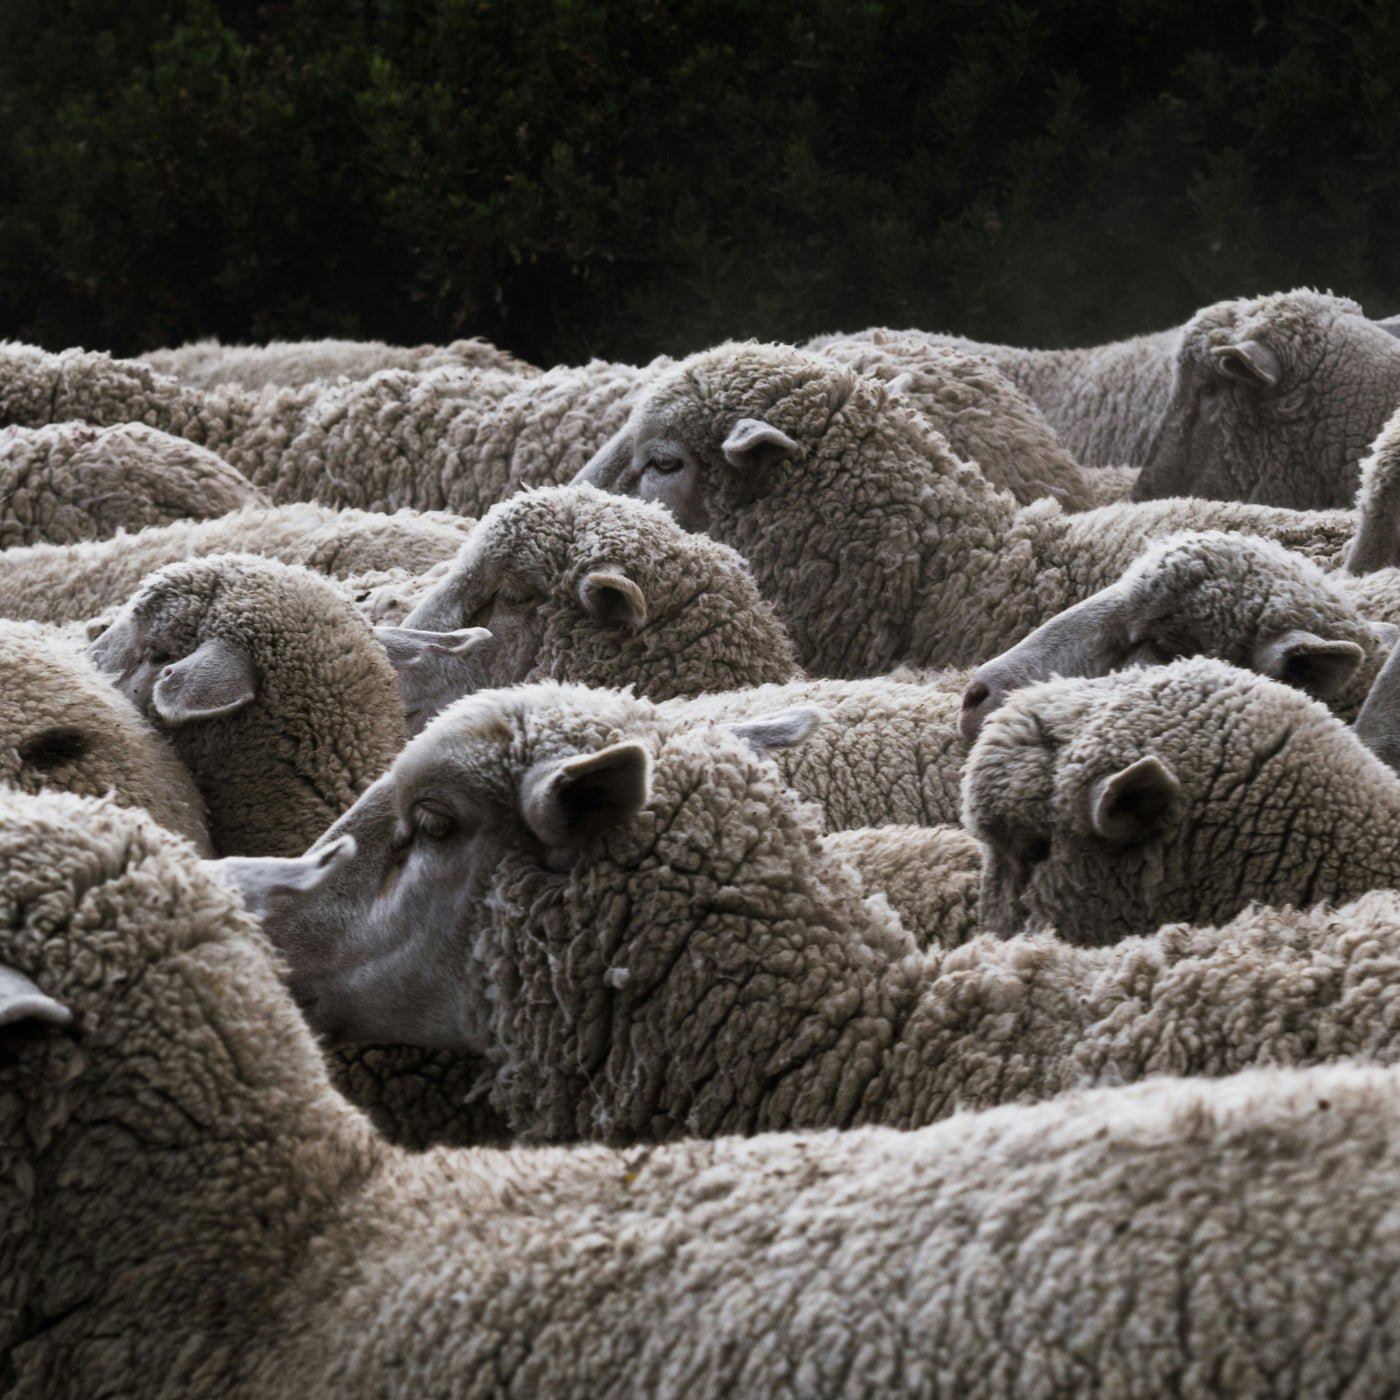 Soft, light and ecological: the virtues of merino wool in detail